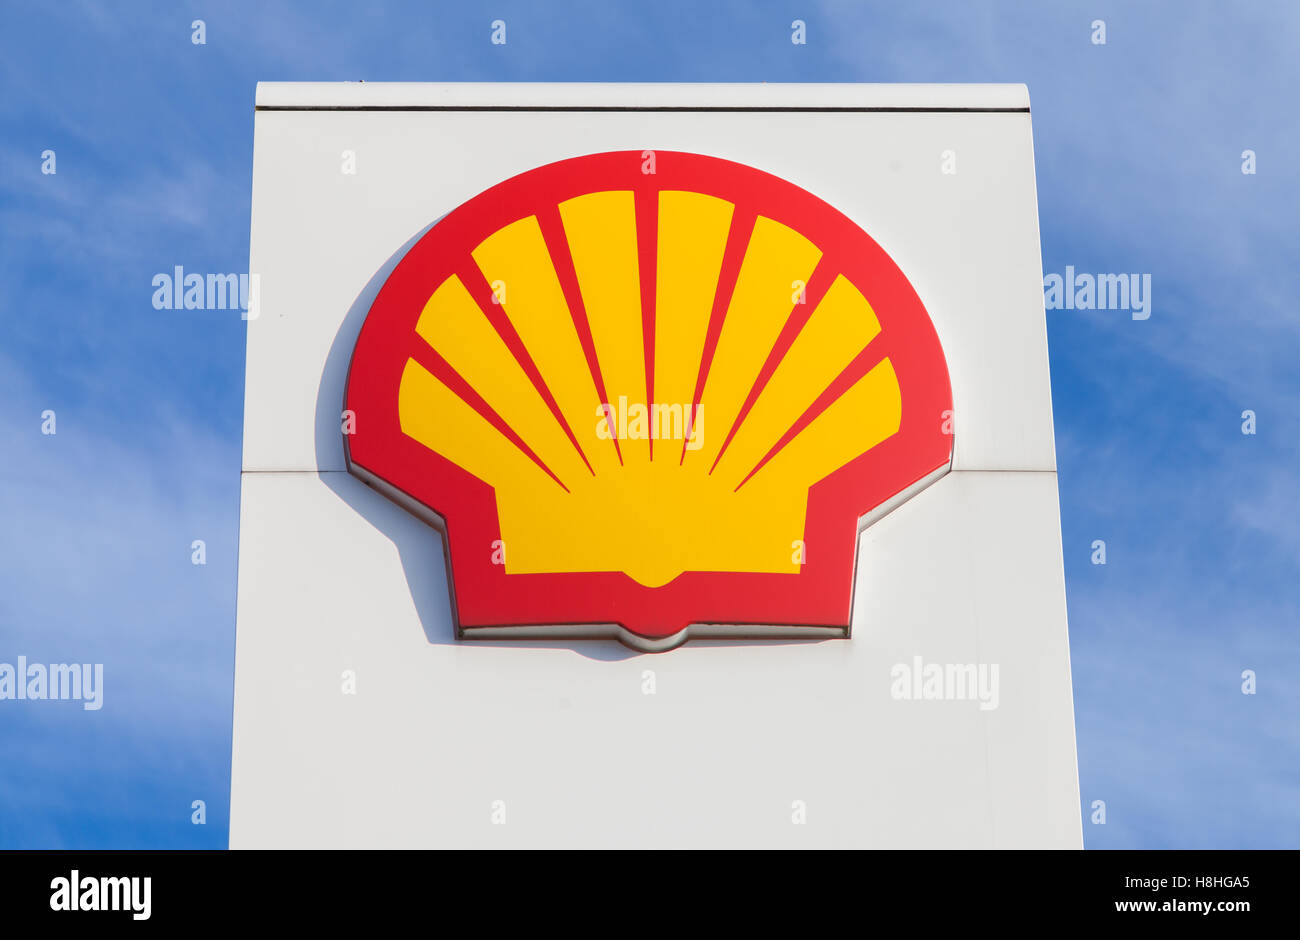 BURG / GERMANY - NOVEMBER 13, 2016: Shell gas station sign. Shell is an Anglo-Dutch multinational oil and gas company. Stock Photo